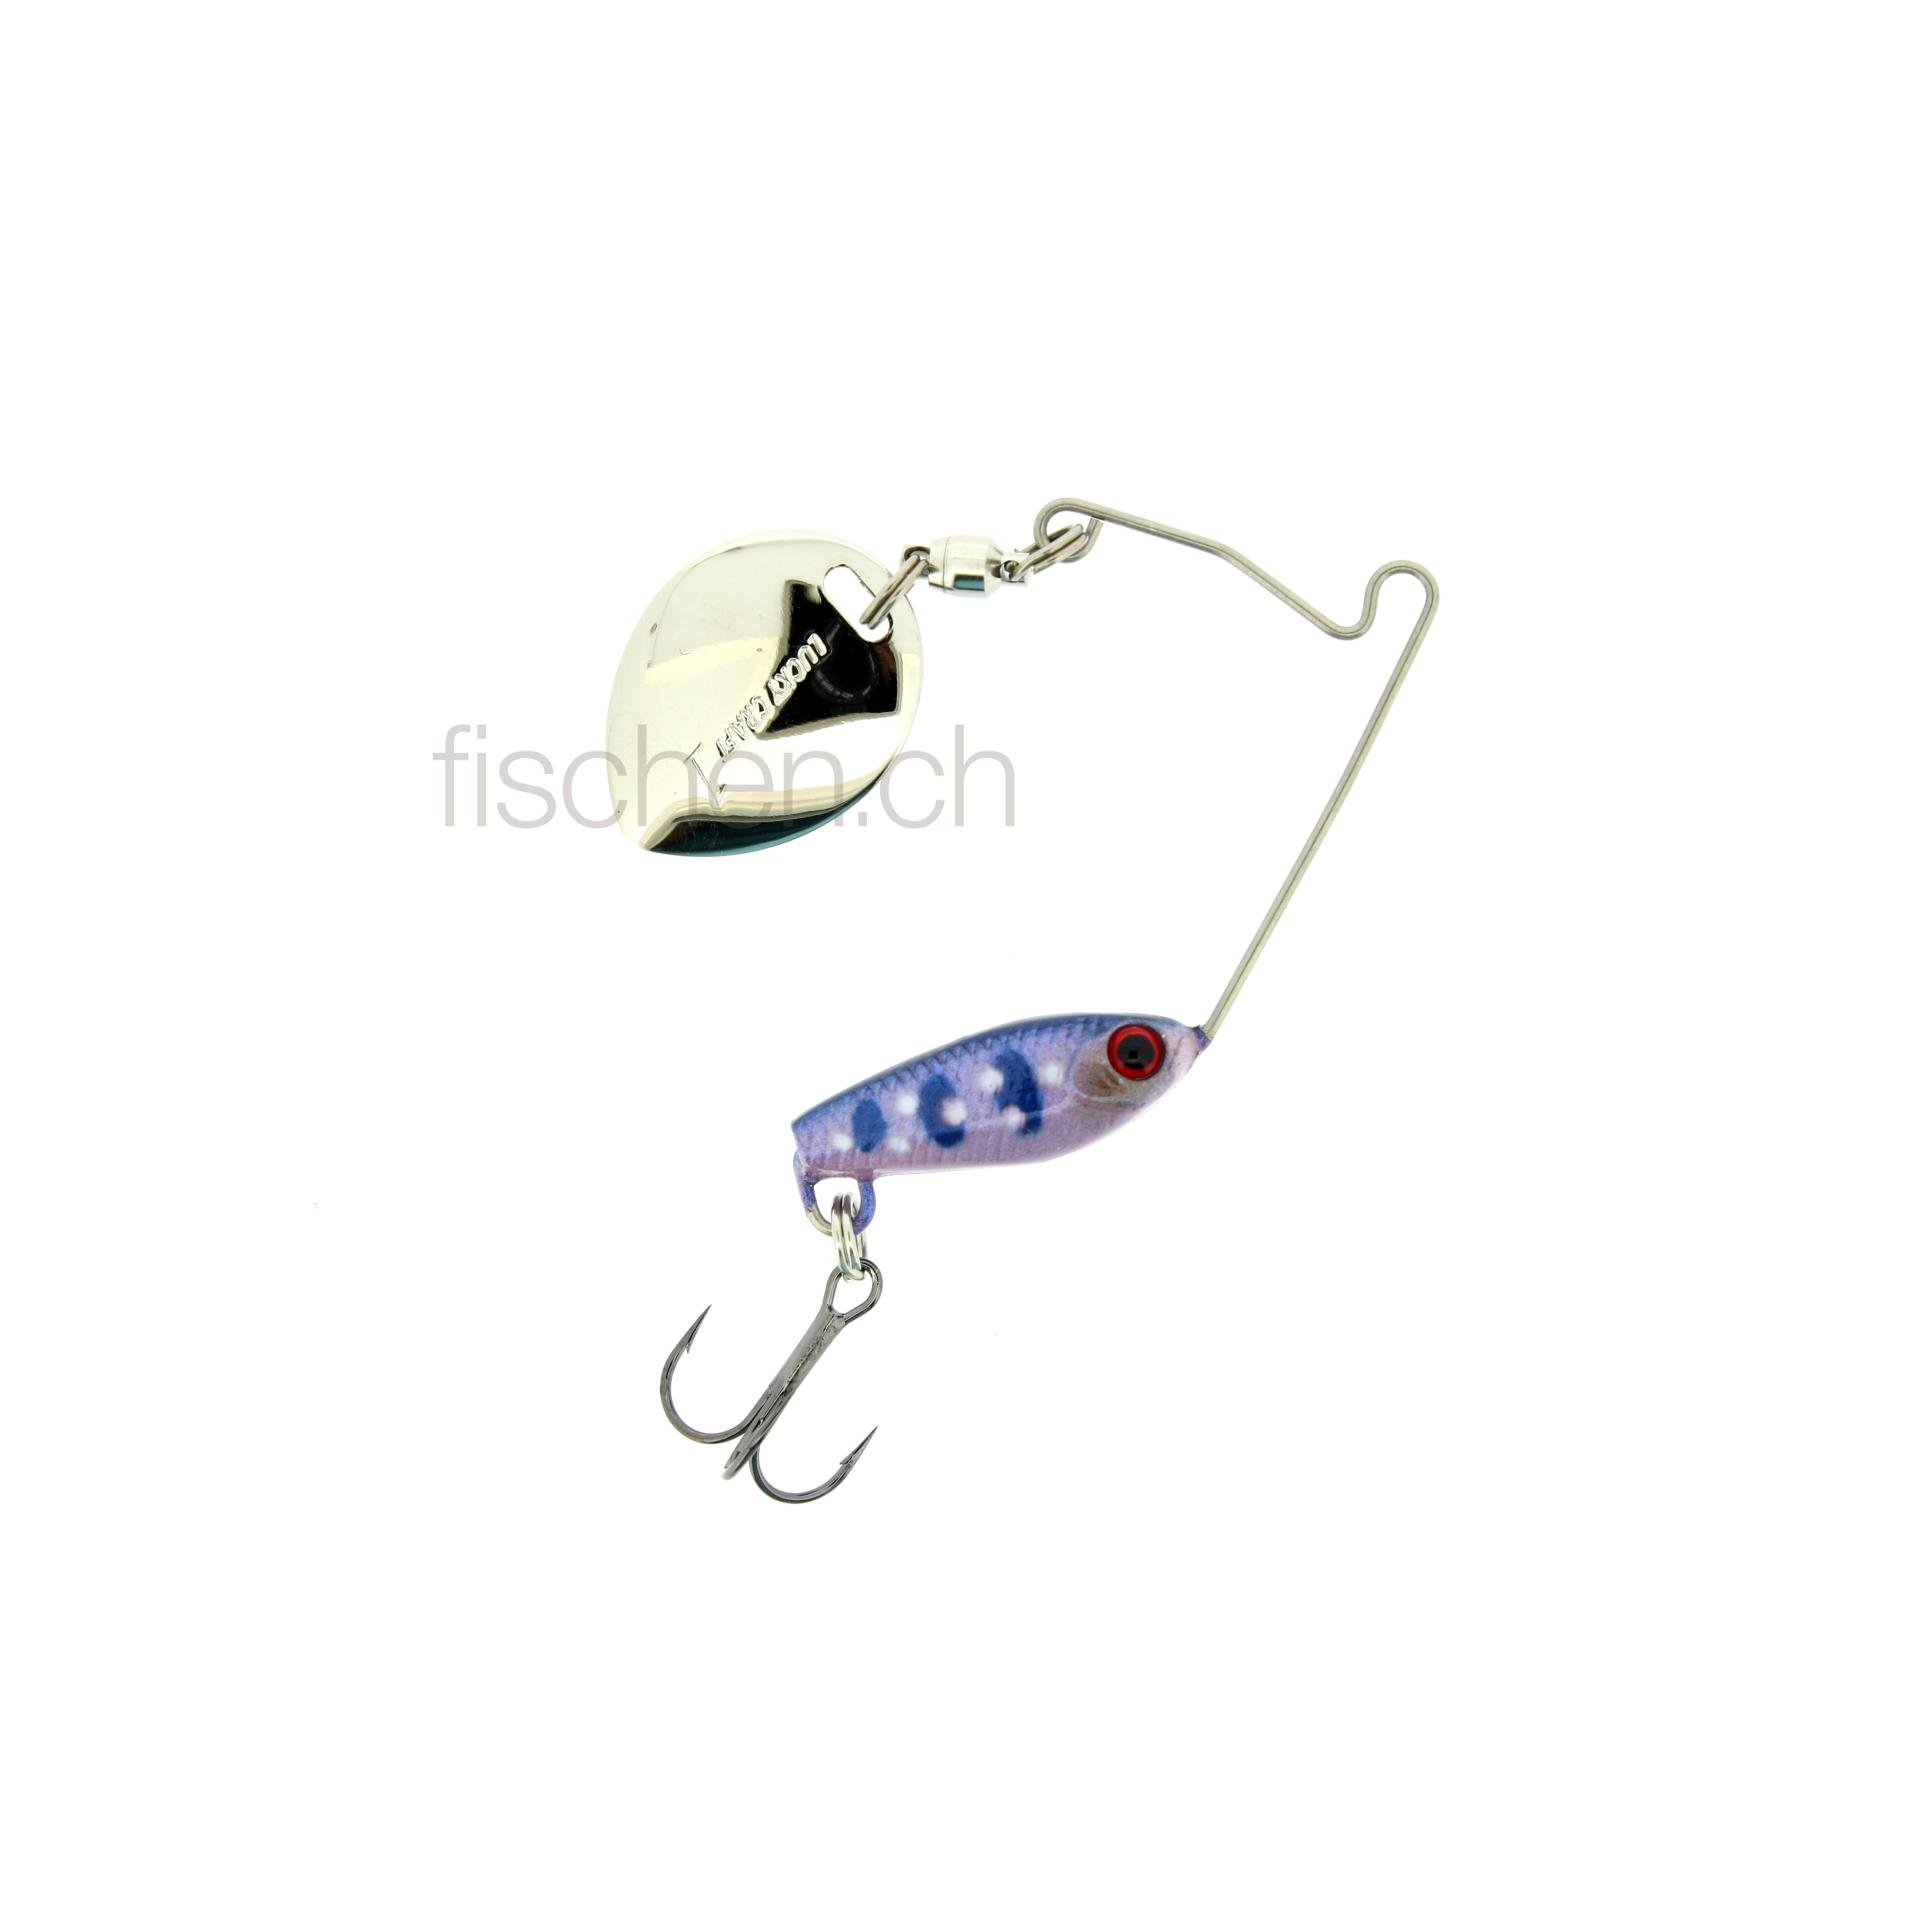 Image of Lucky Craft Area's 3/16oz Clear Blue Iwana - Micro Spinnerbait bei fischen.ch